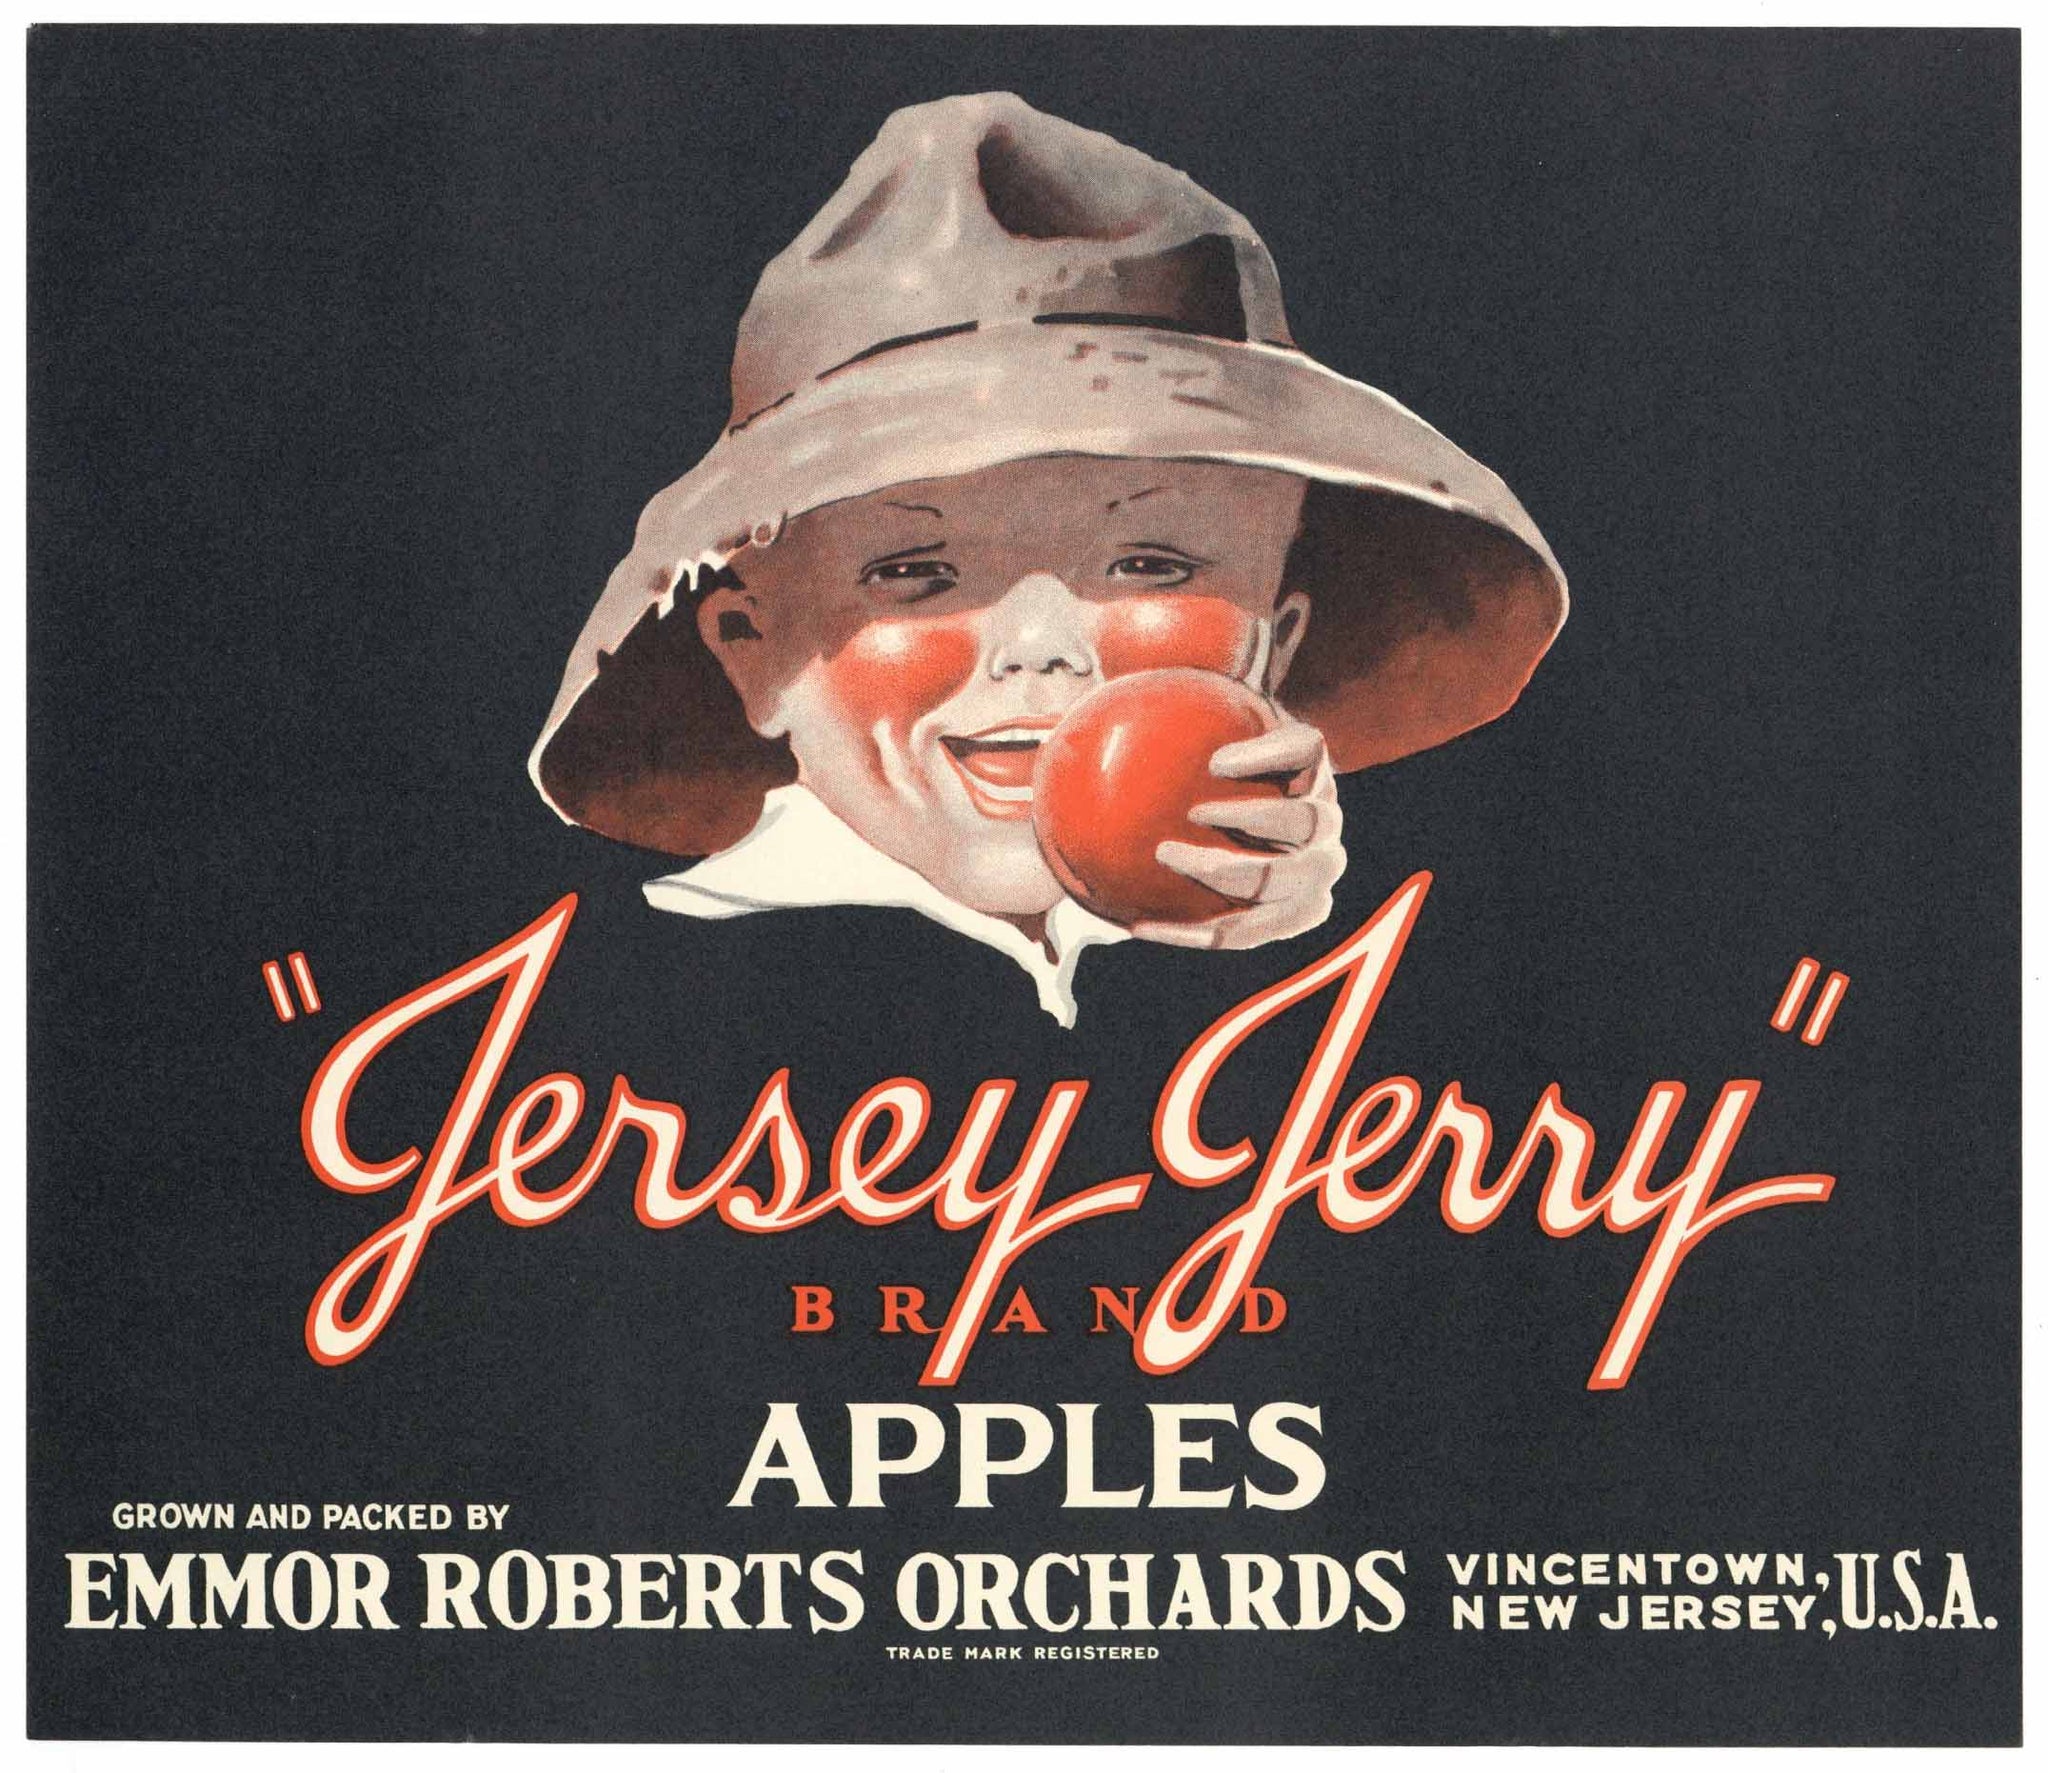 Jersey Jerry Brand Vintage Vincentown New Jersey Apple Crate Label